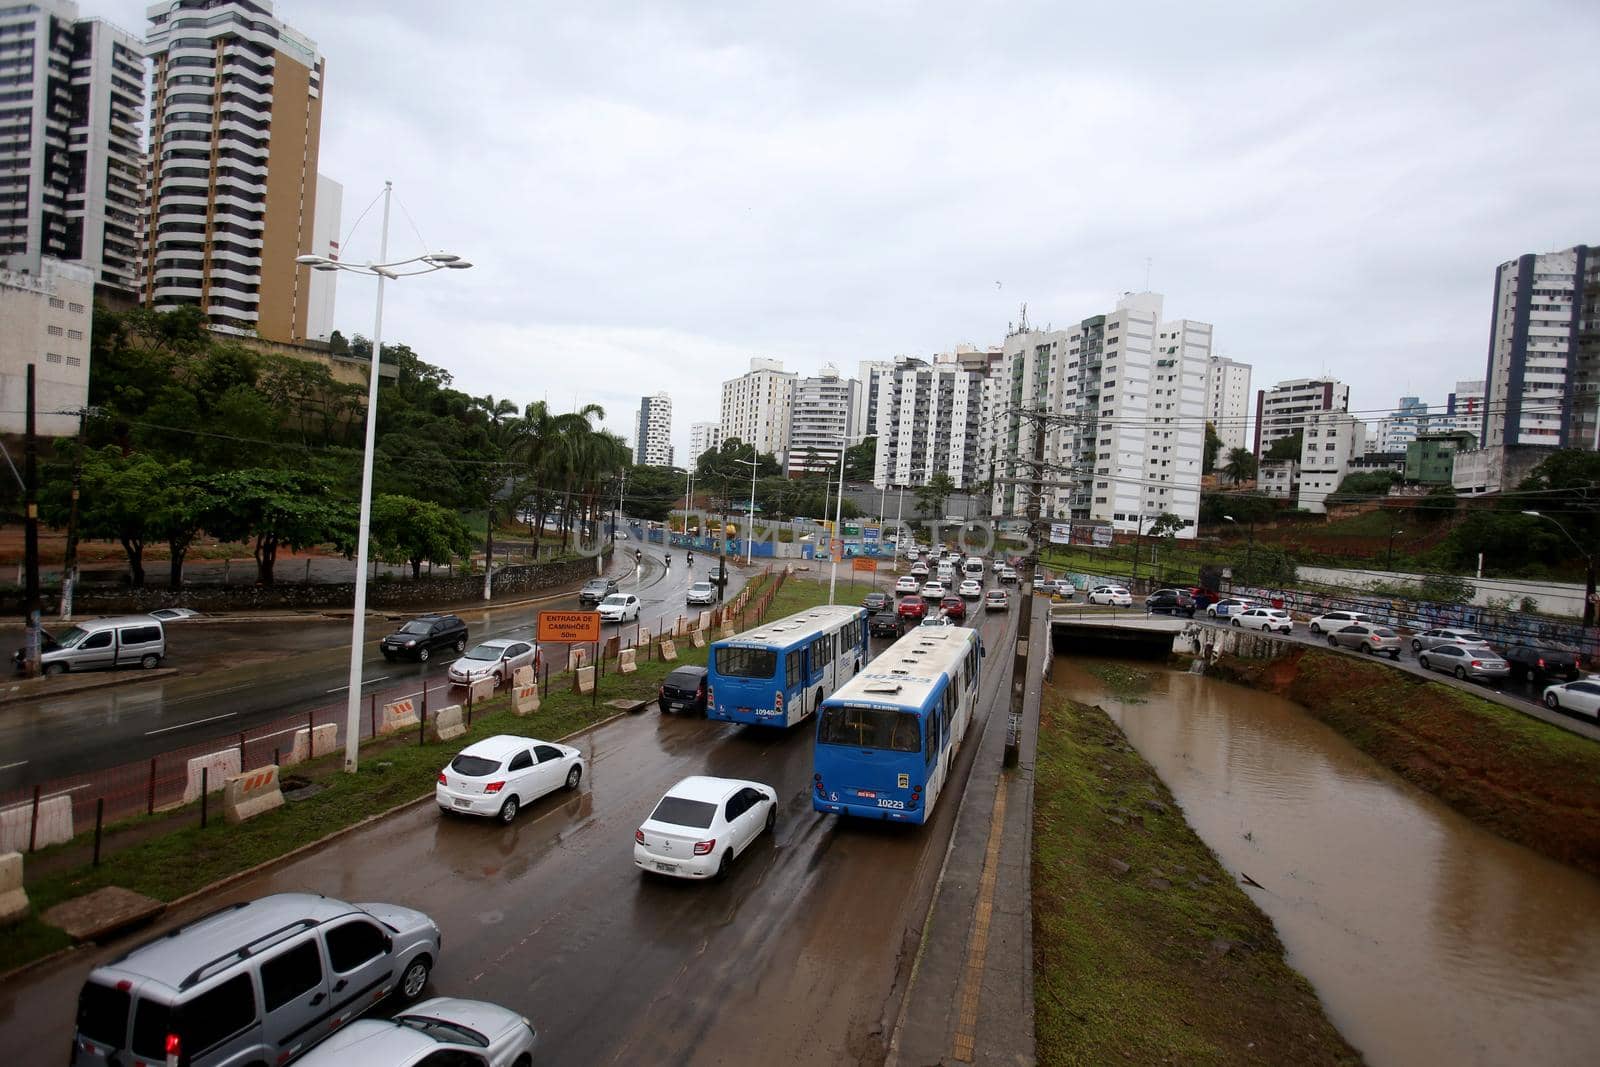 salvador, bahia / brazil - march 25, 2019: vehicles are seen transiting on a rainy day along avenue acm in the city of Salvador.